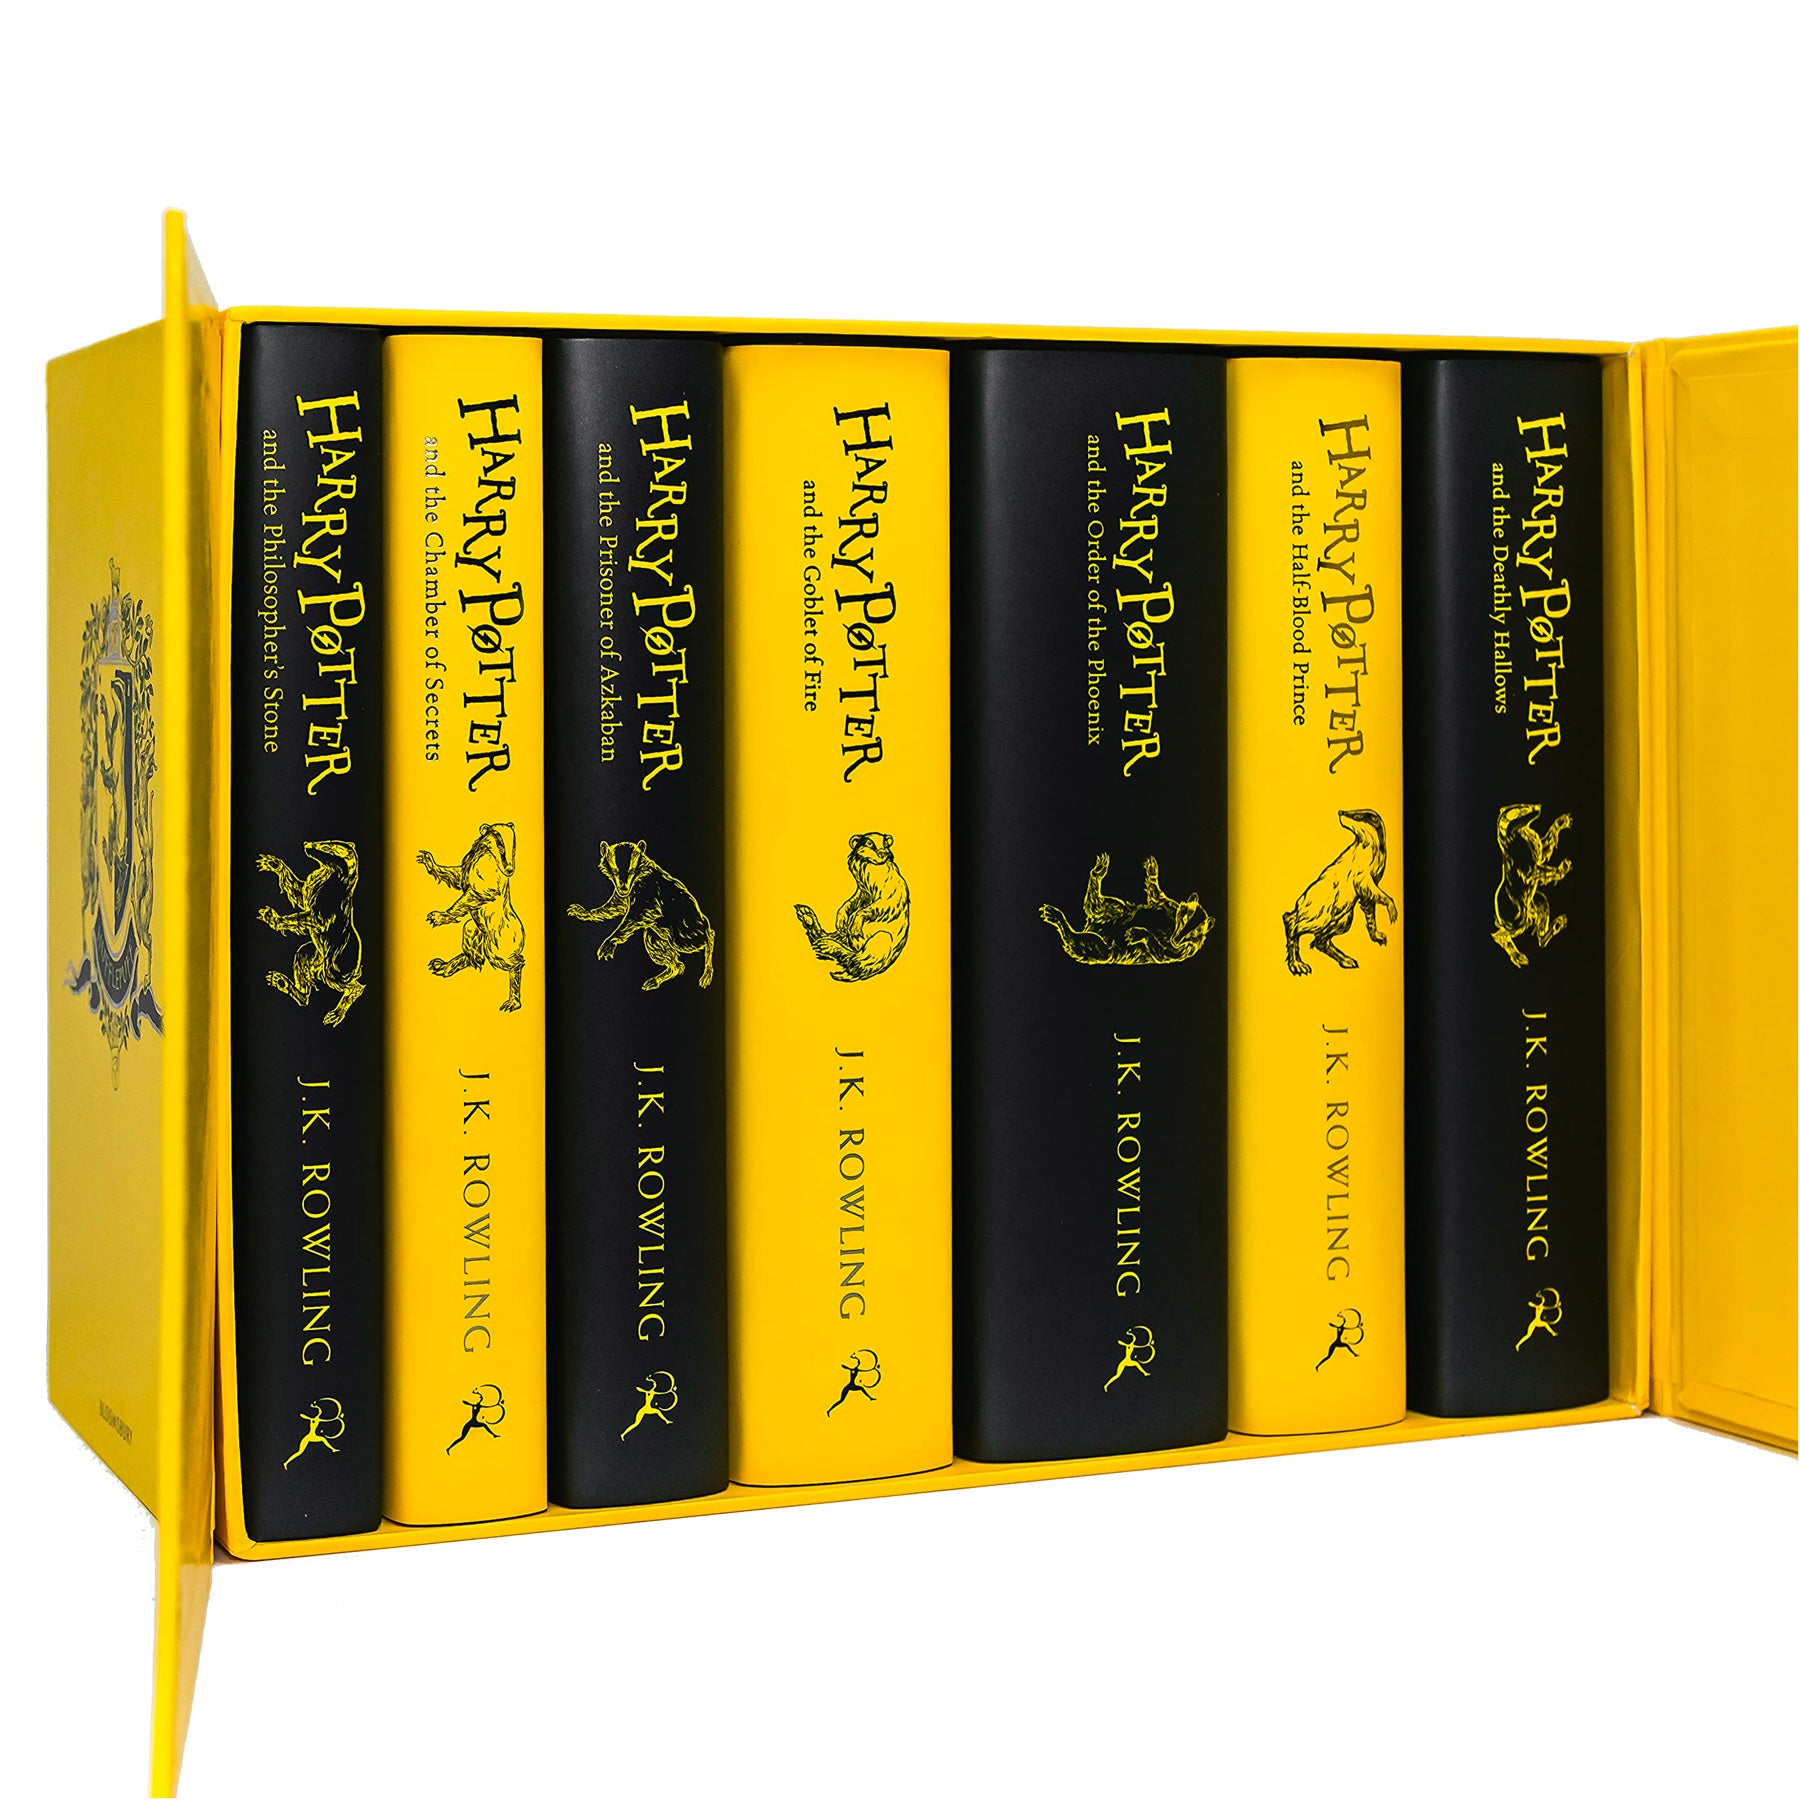 Hufflepuff Hardcover House Edition Complete Box Set